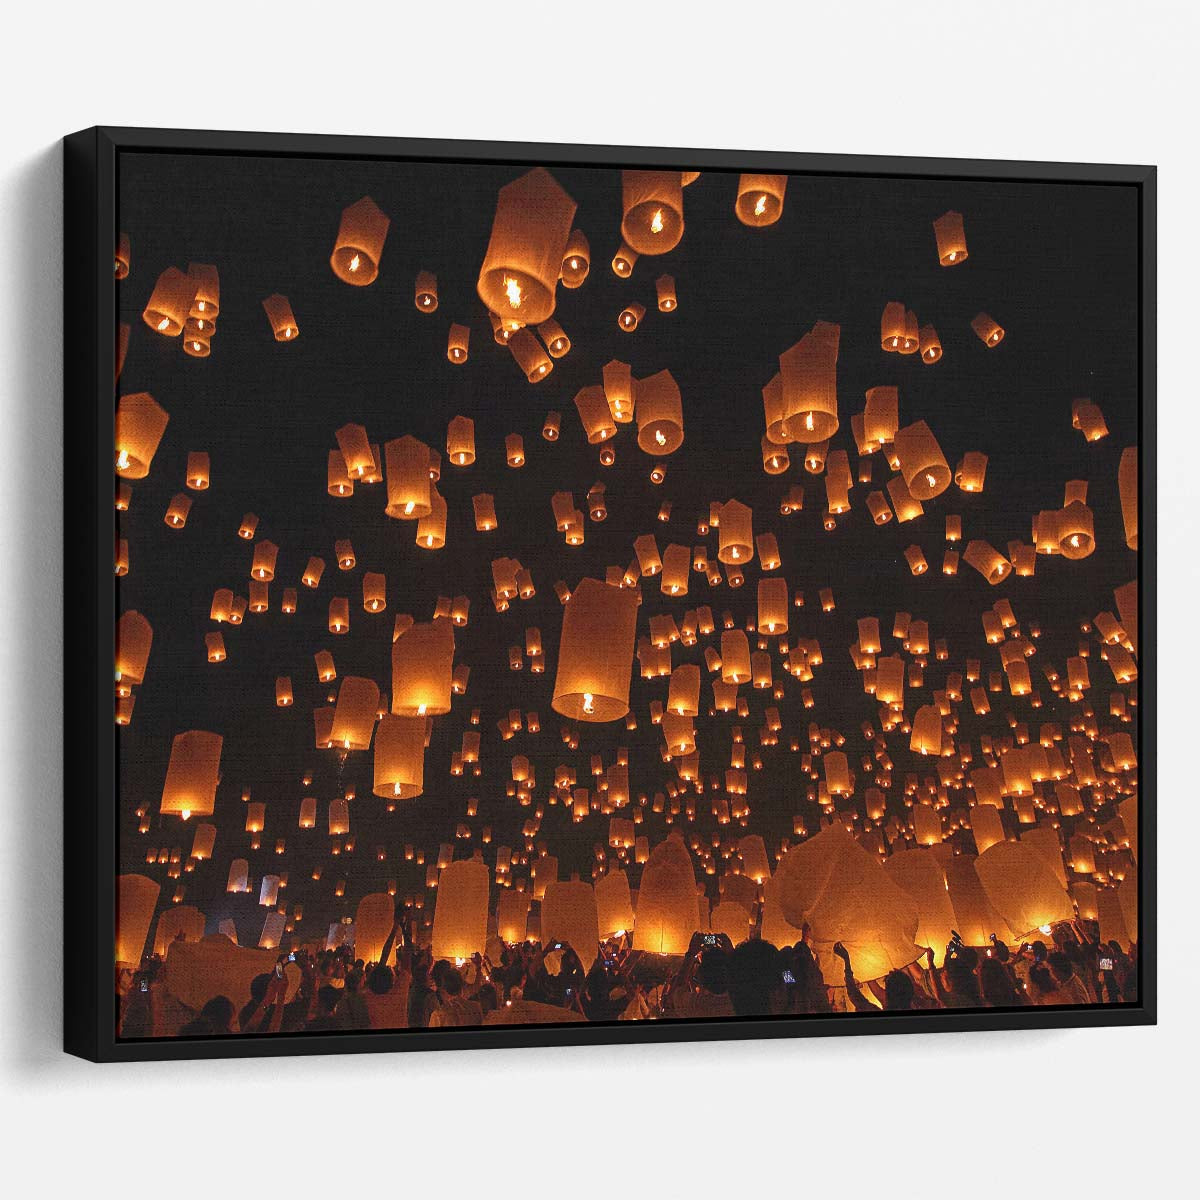 Golden Floating Lanterns Festival Night Wall Art by Luxuriance Designs. Made in USA.